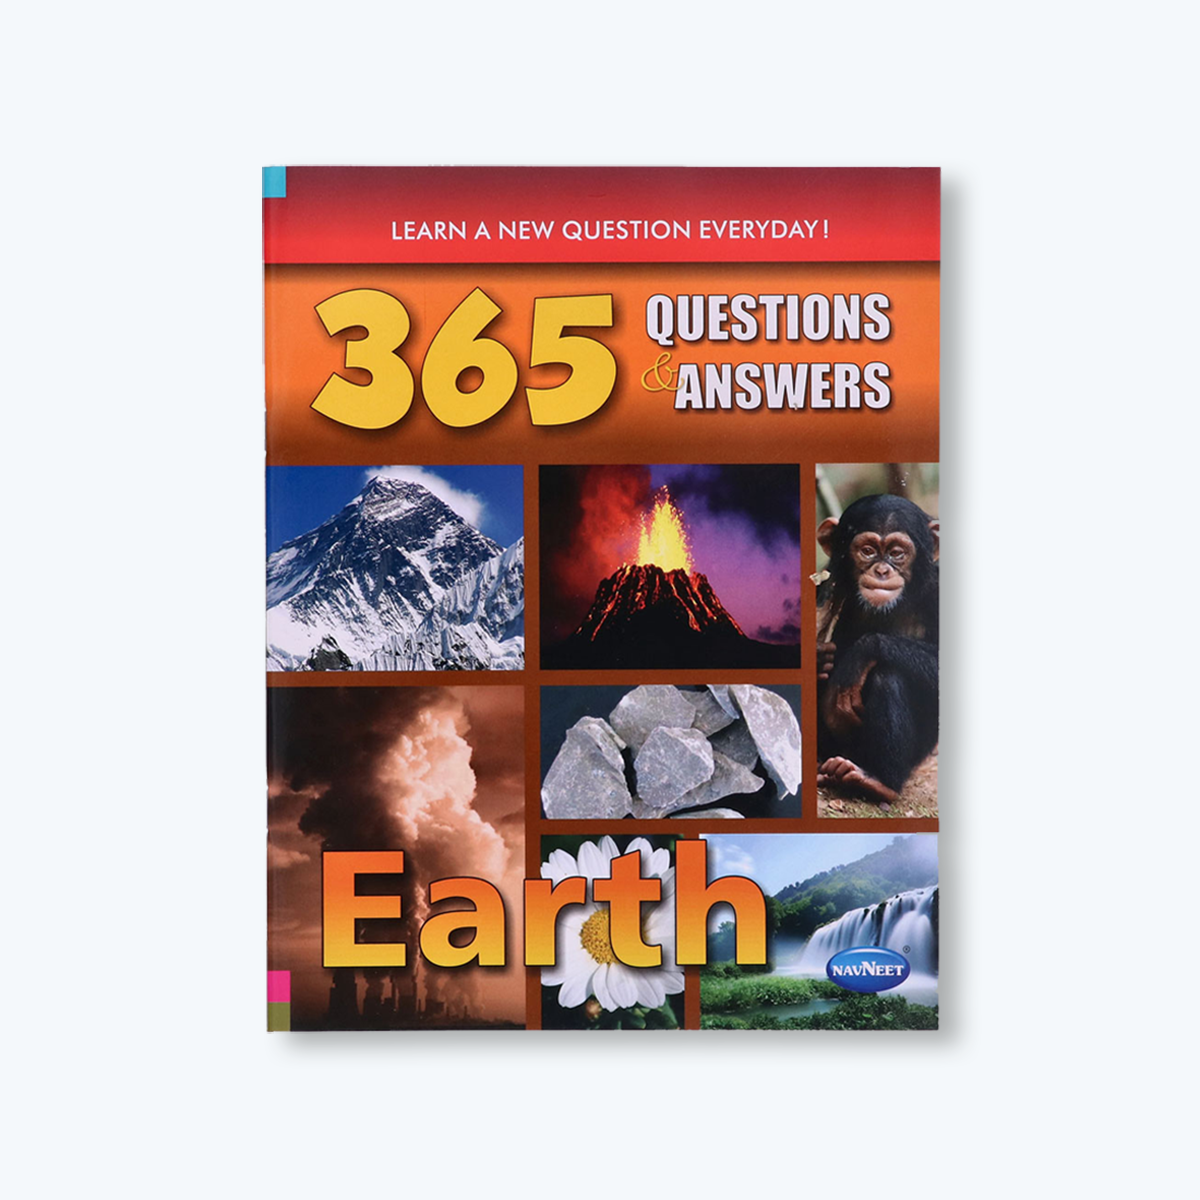 Navneet 365 Questions & Answers- Natural Wonders, Natural Disasters & Earth for Kids- General Knowledge Books- Nourish Young Minds- Information and Facts